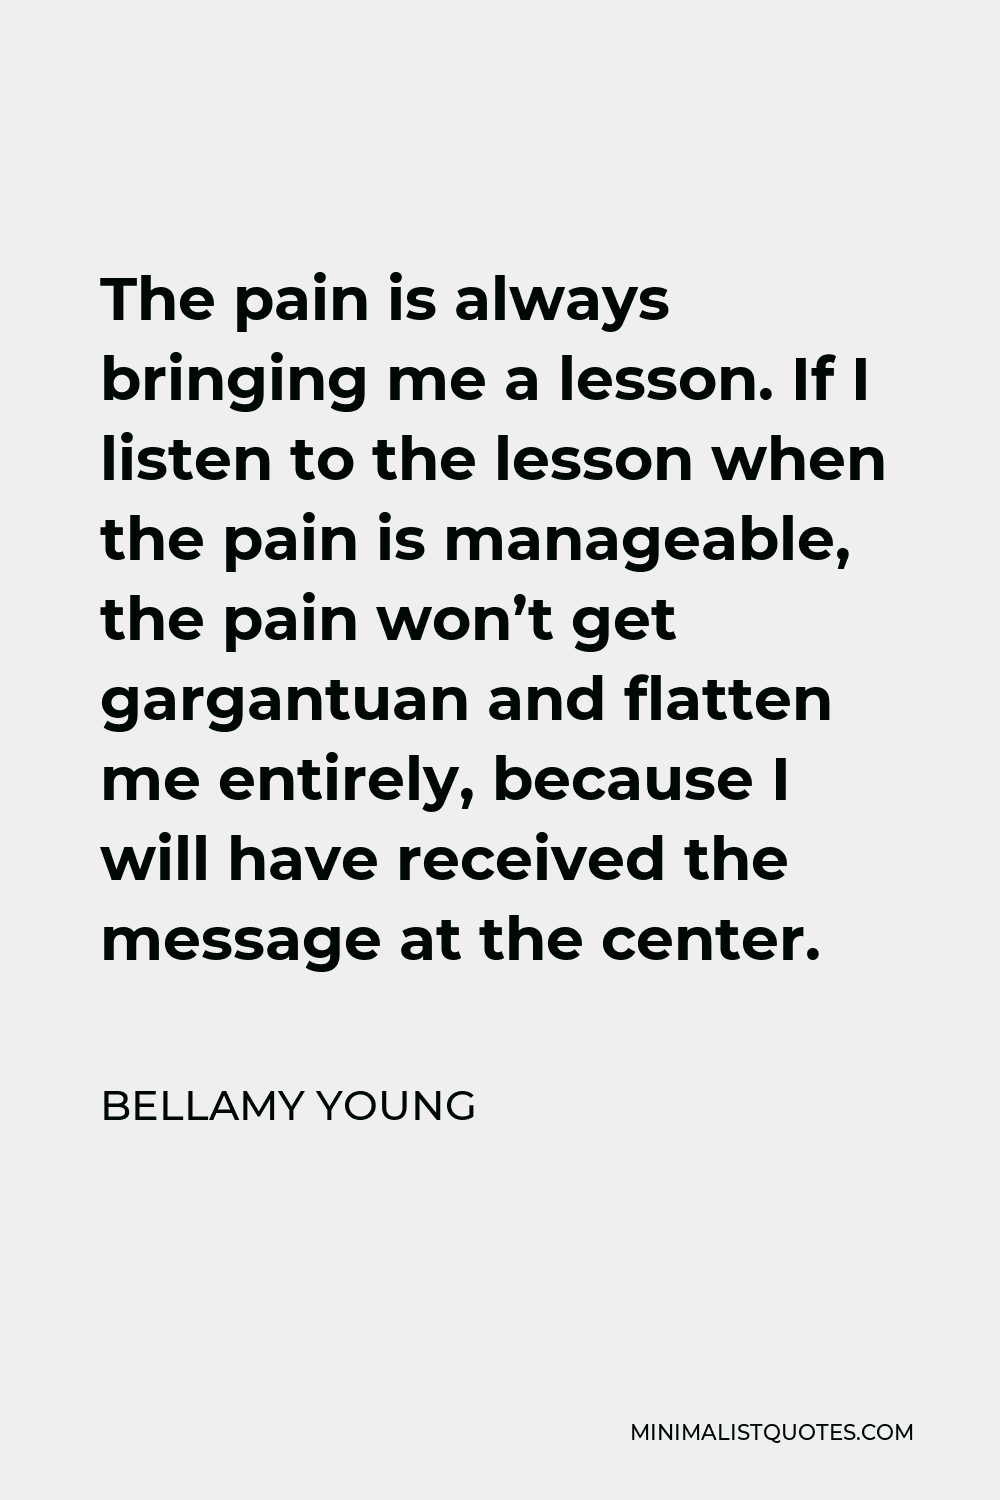 Bellamy Young Quote - The pain is always bringing me a lesson. If I listen to the lesson when the pain is manageable, the pain won’t get gargantuan and flatten me entirely, because I will have received the message at the center.